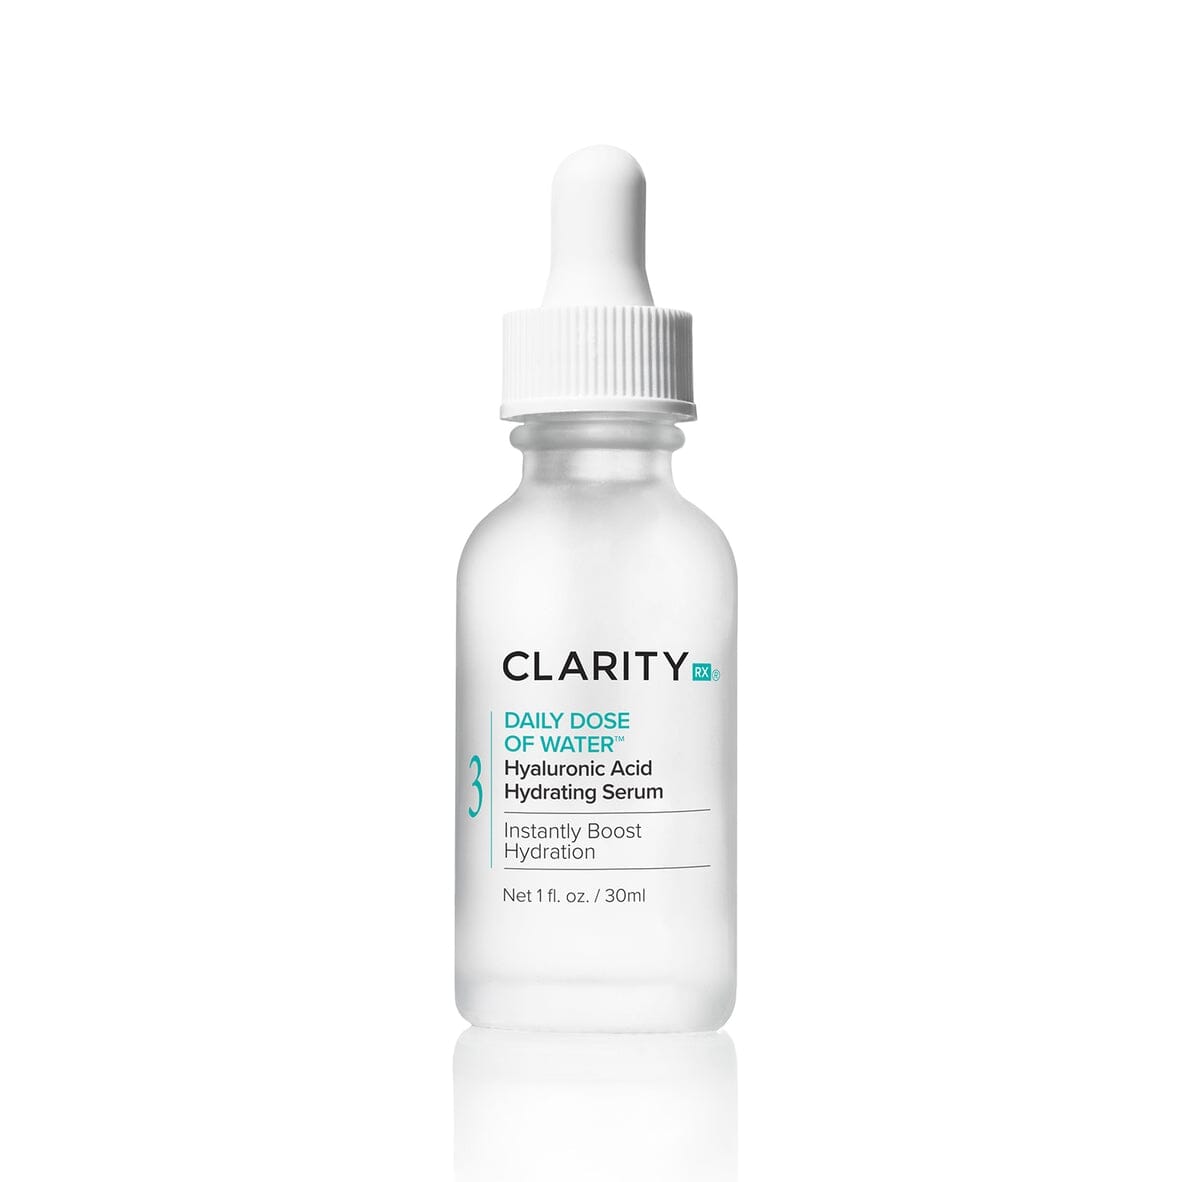 ClarityRx Daily Dose of Water Hyaluronic Acid Hydrating Serum ClarityRx 1.0 oz. Shop at Exclusive Beauty Club